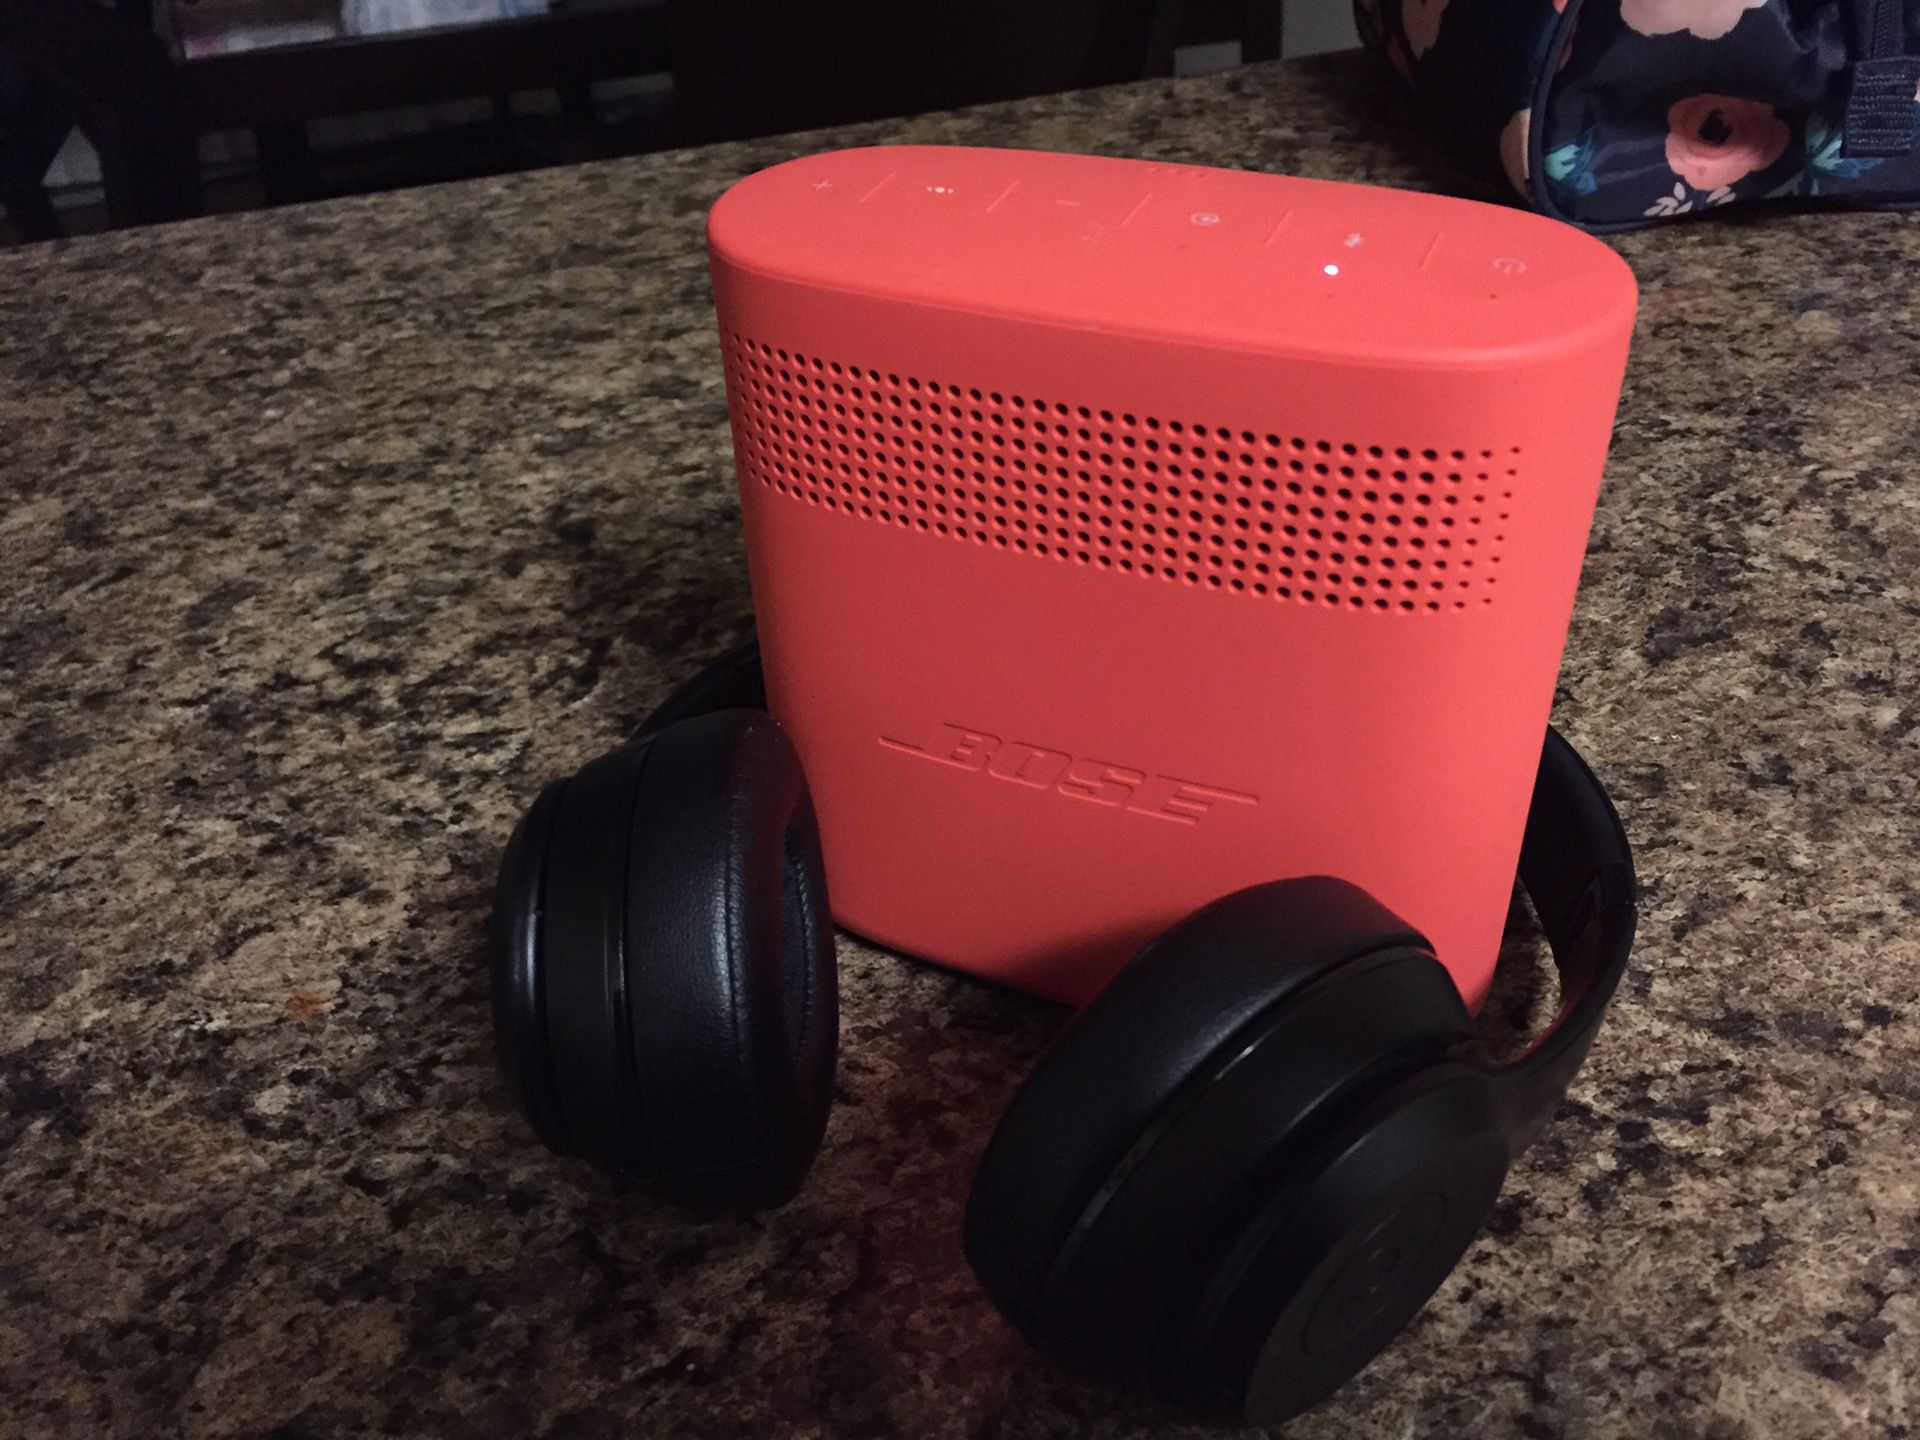 BOSE SOUNDLINK 2 and BEATS SOLO 3